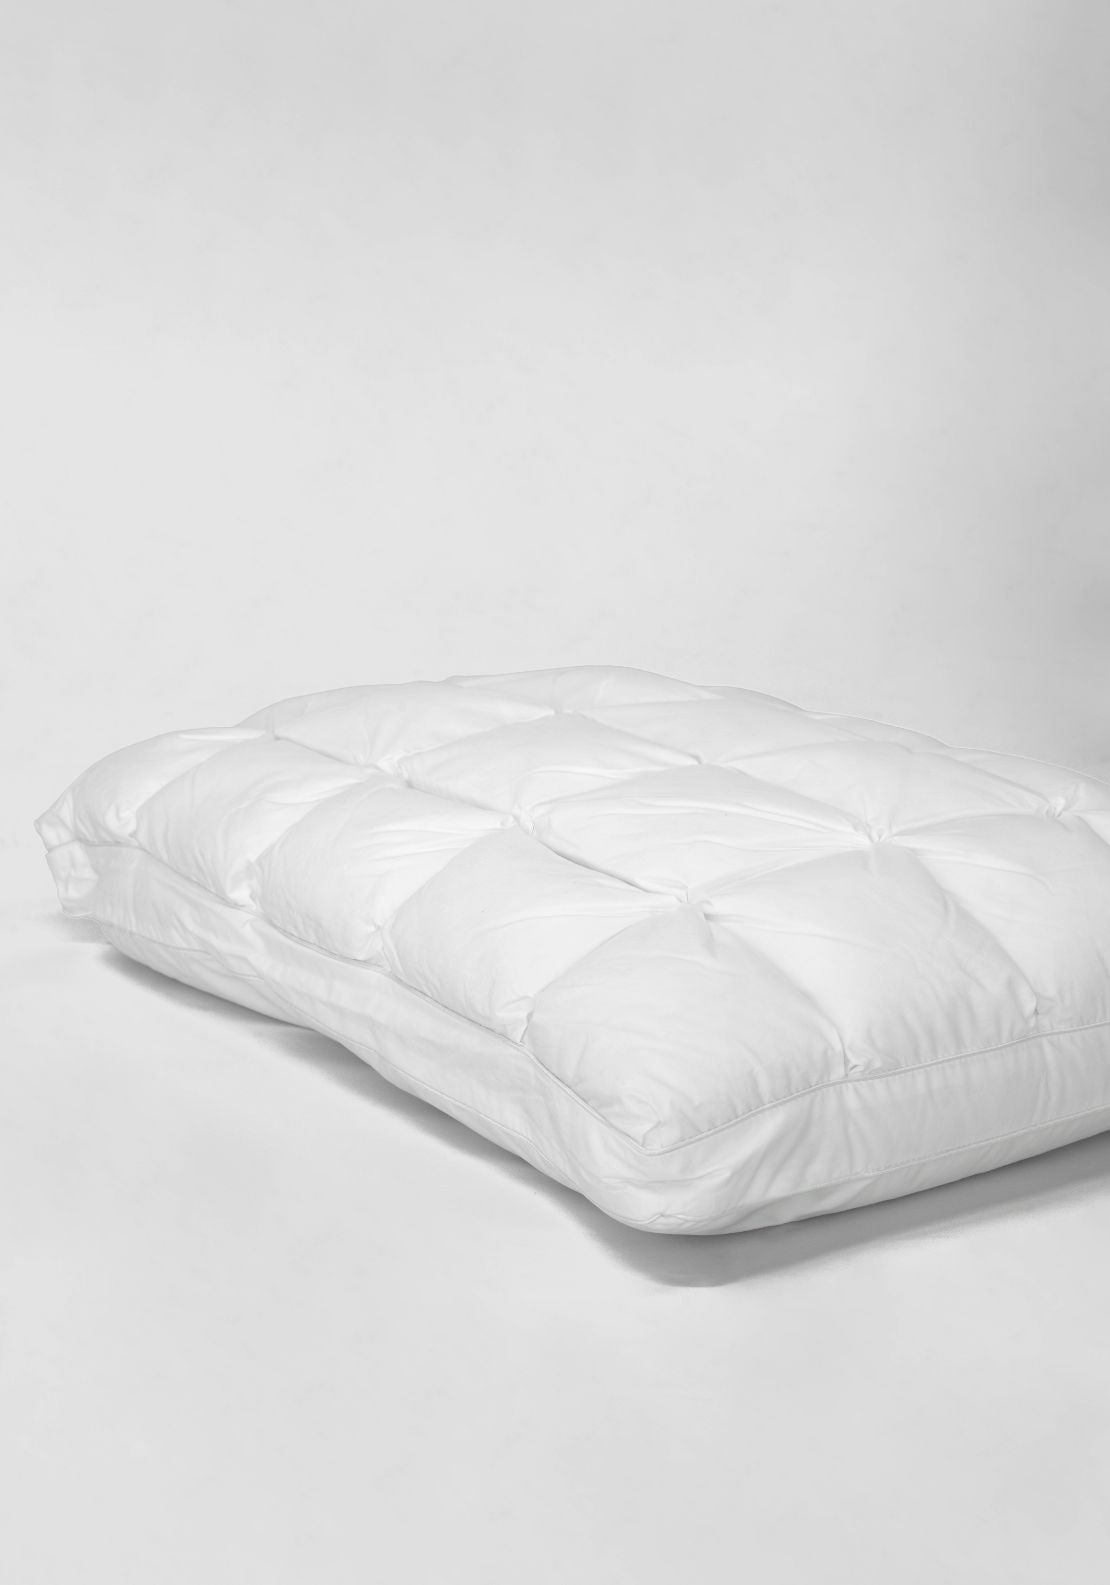 The Home Luxury Collection Never Go Flat Pillow - White 3 Shaws Department Stores